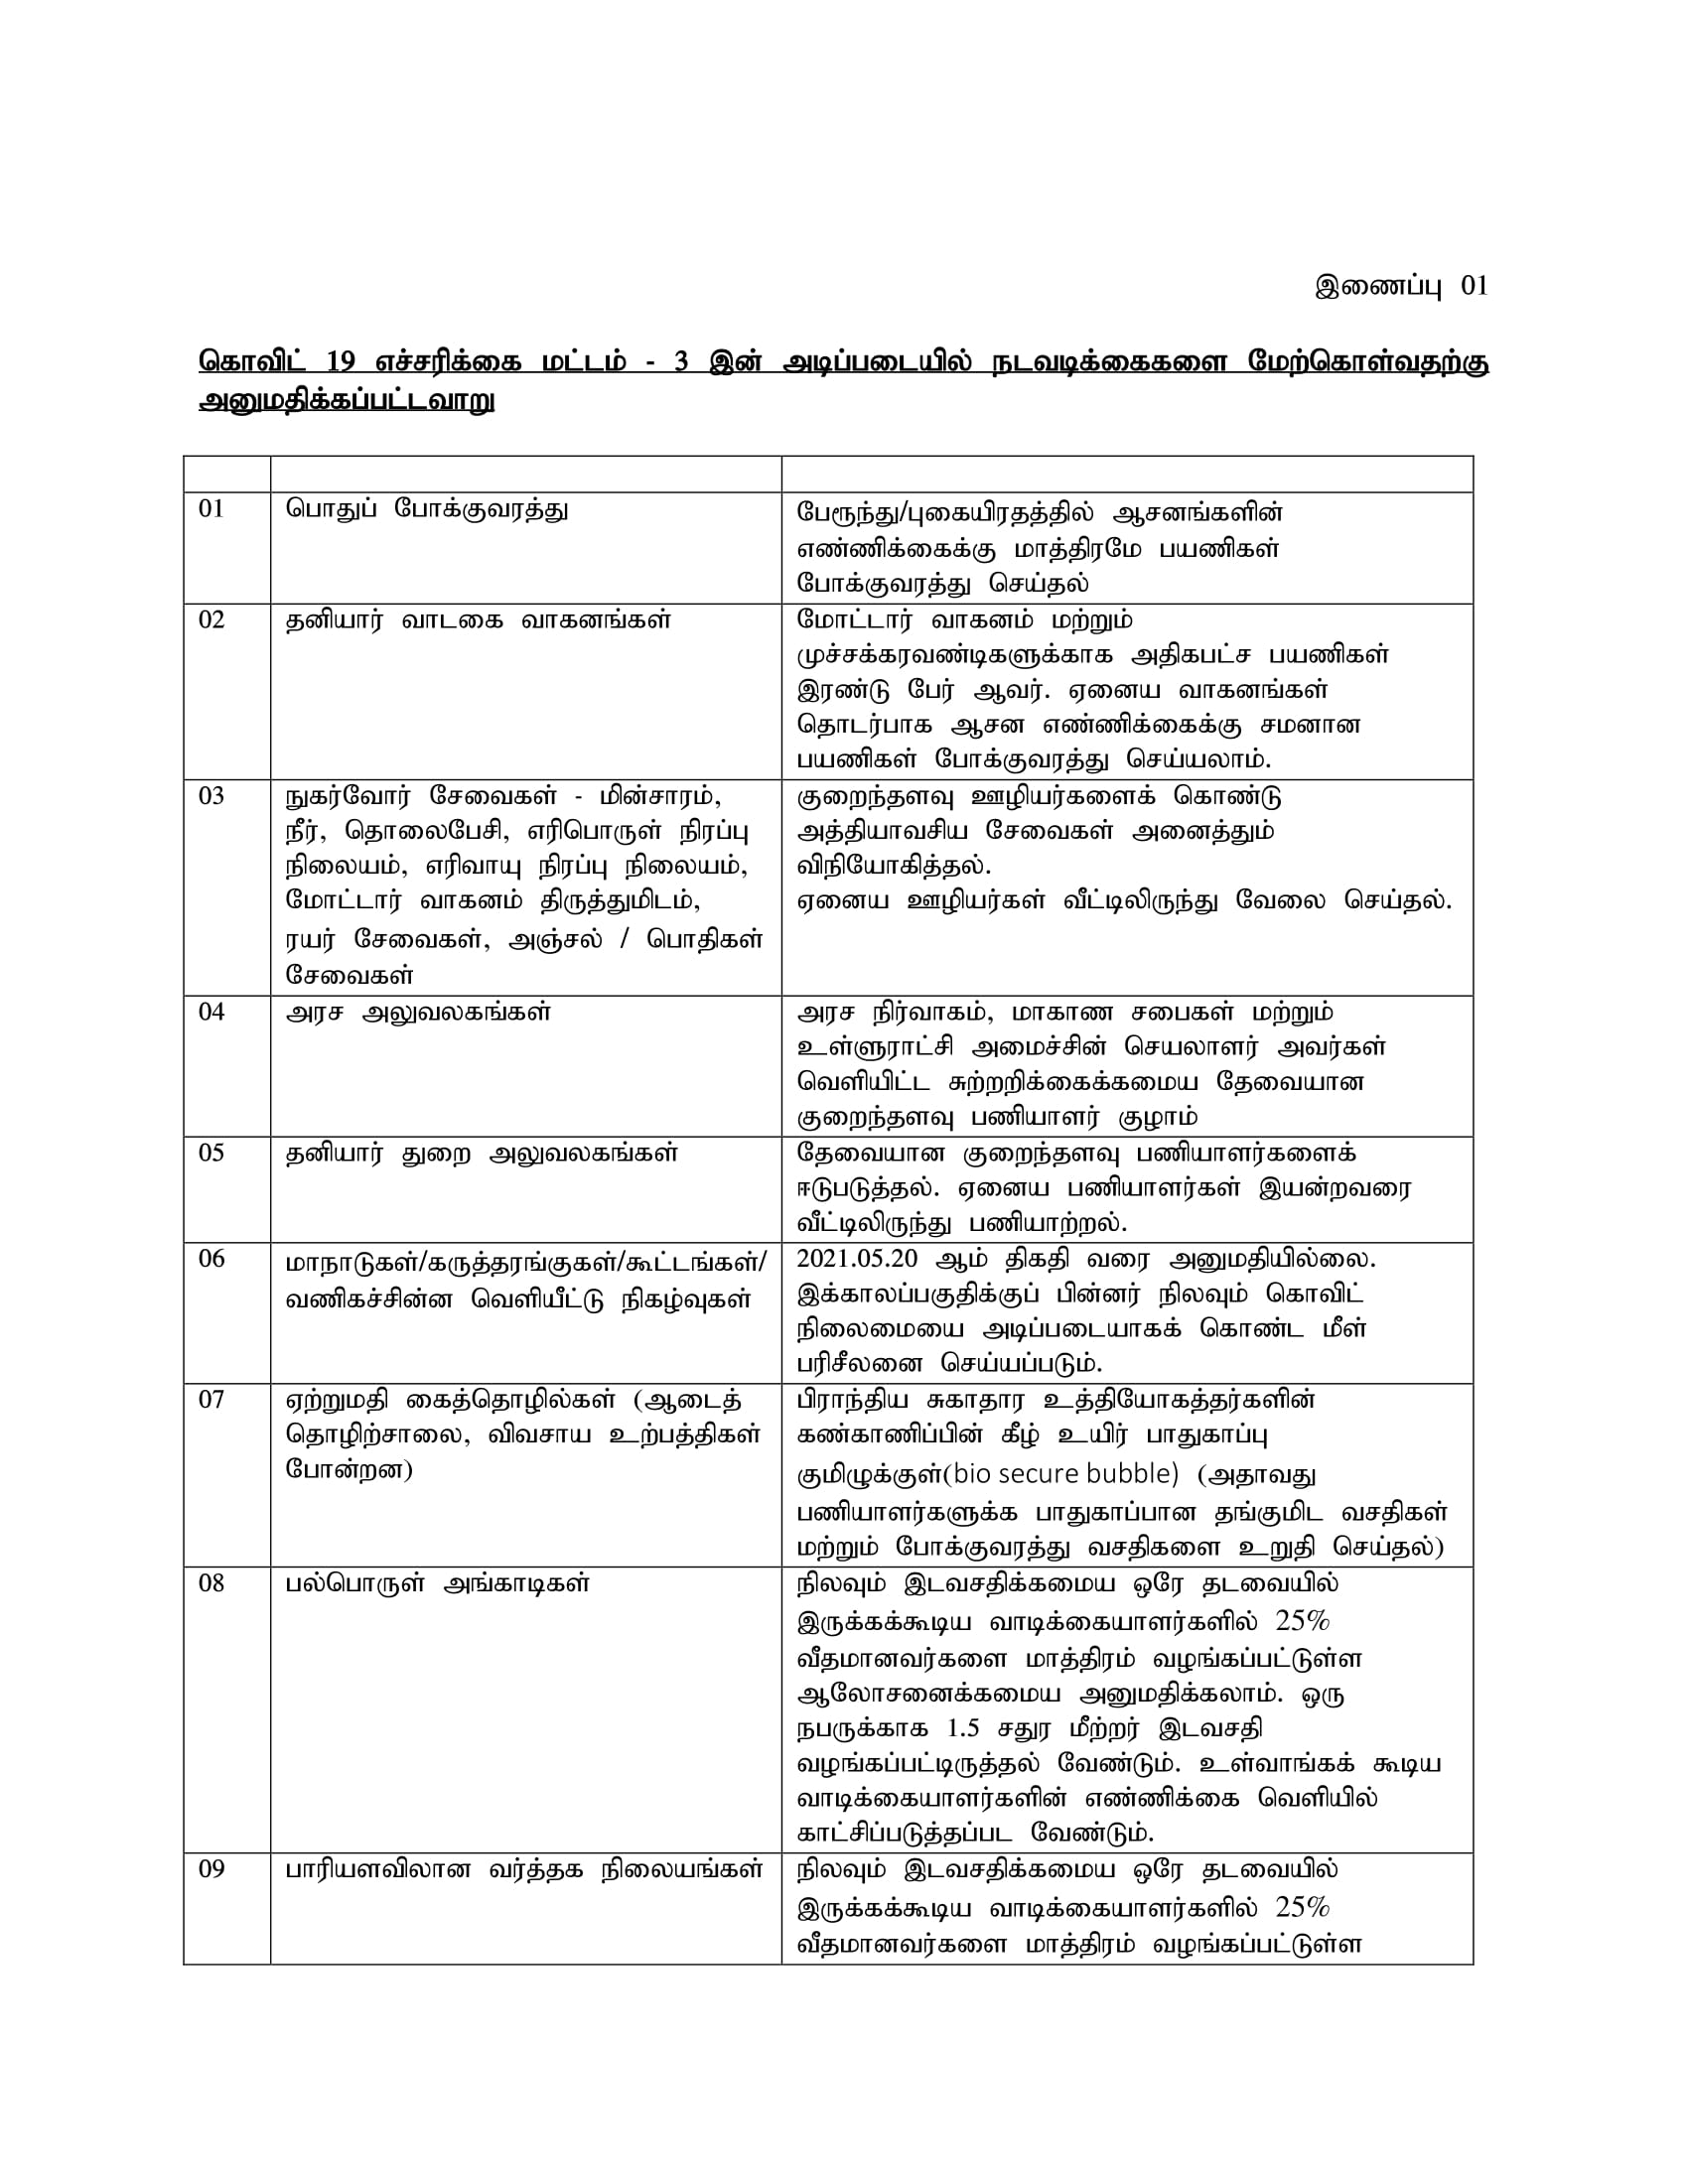 Alert Level 3 Covid 19 Restrictions Further Revised Tamil 2